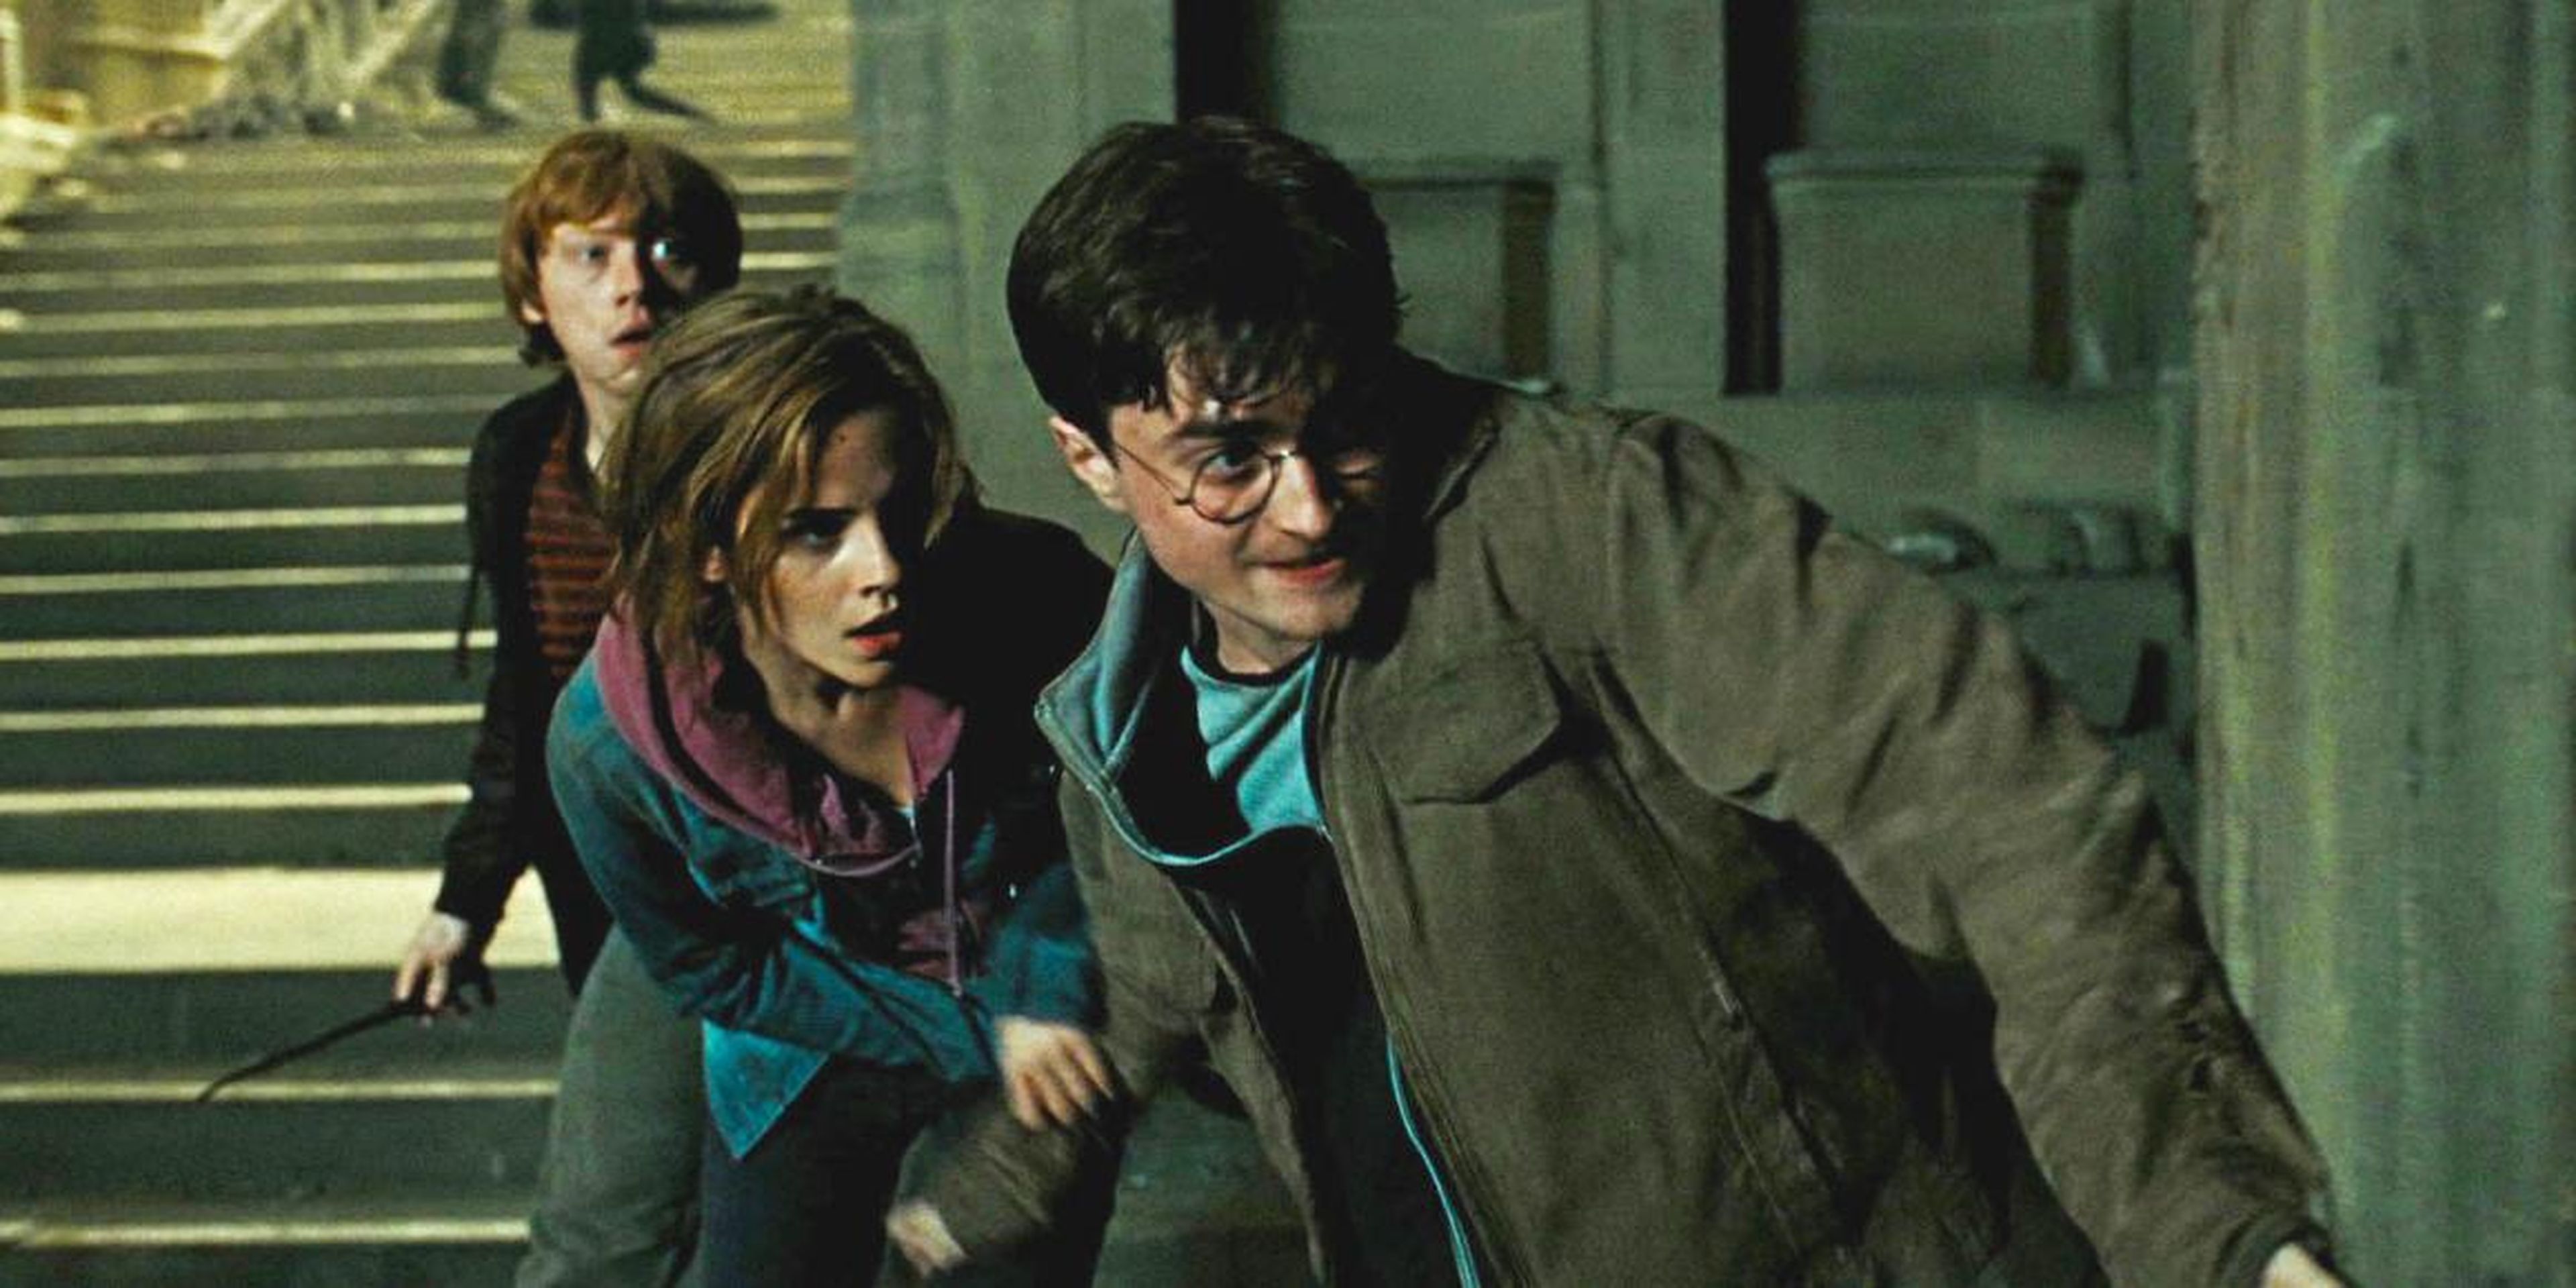 2011: “Harry Potter and the Deathly Hallows: Part Two”